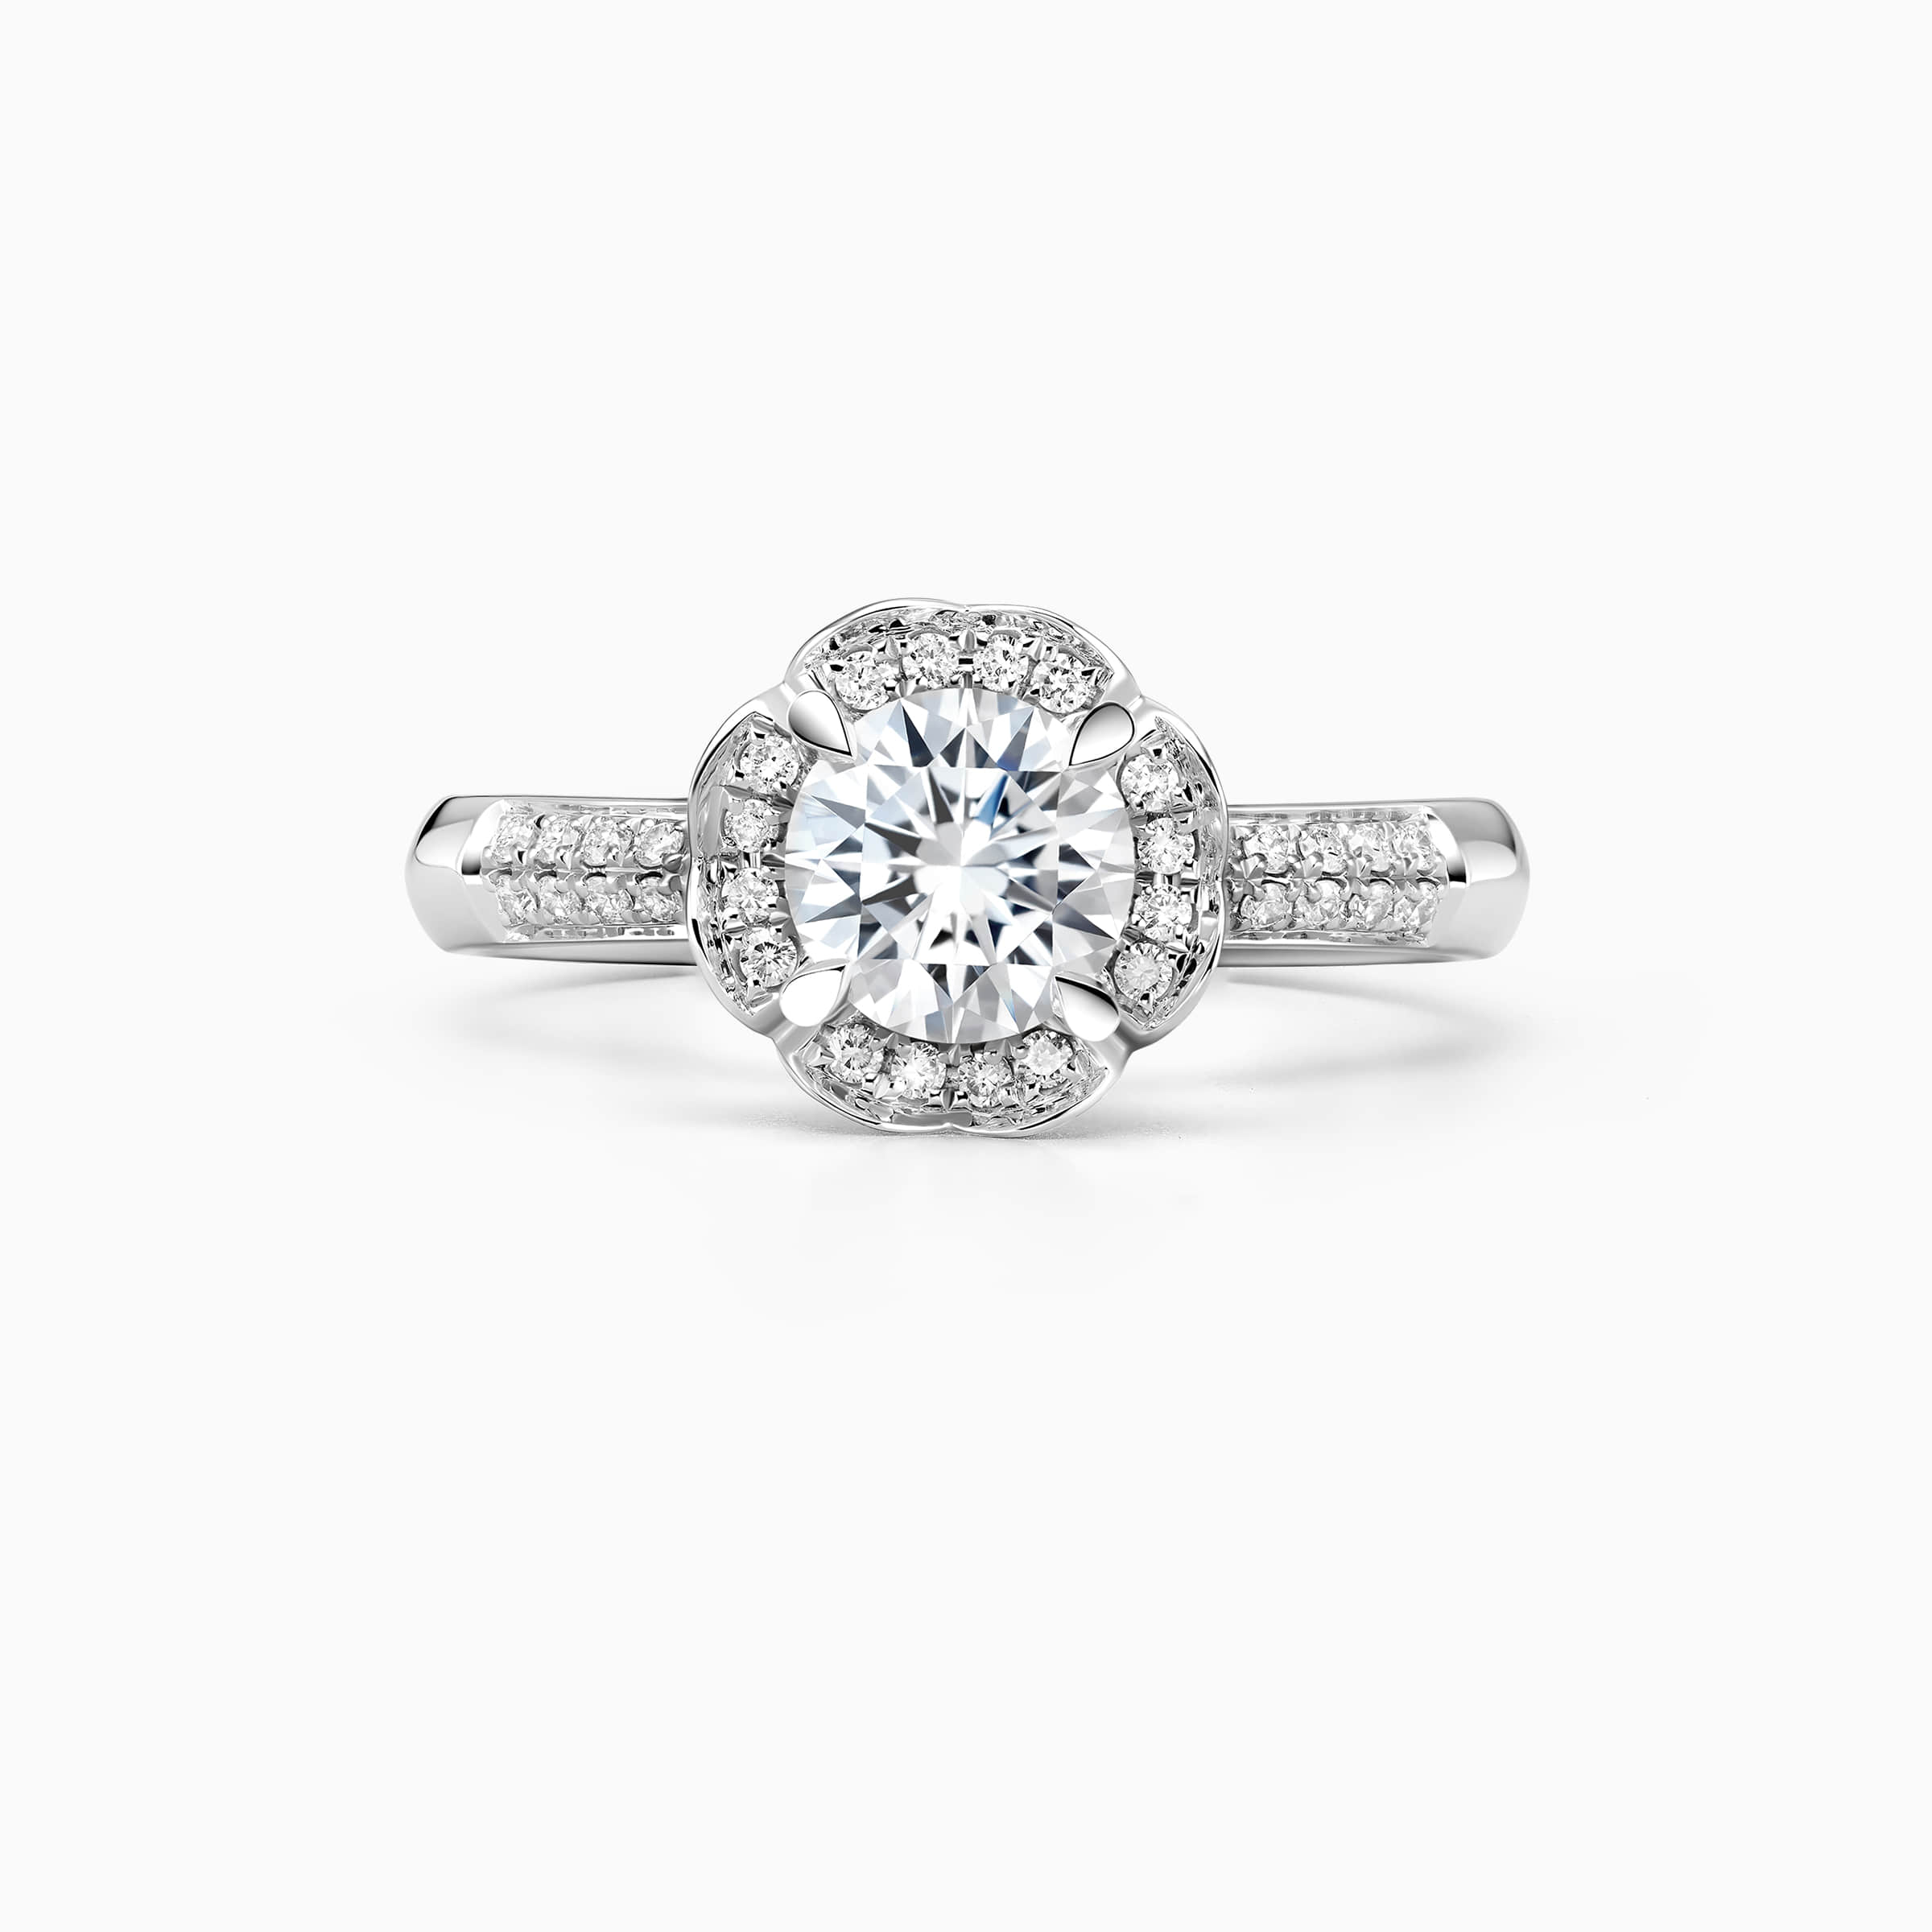 Darry Ring round hidden halo engagement ring in white gold